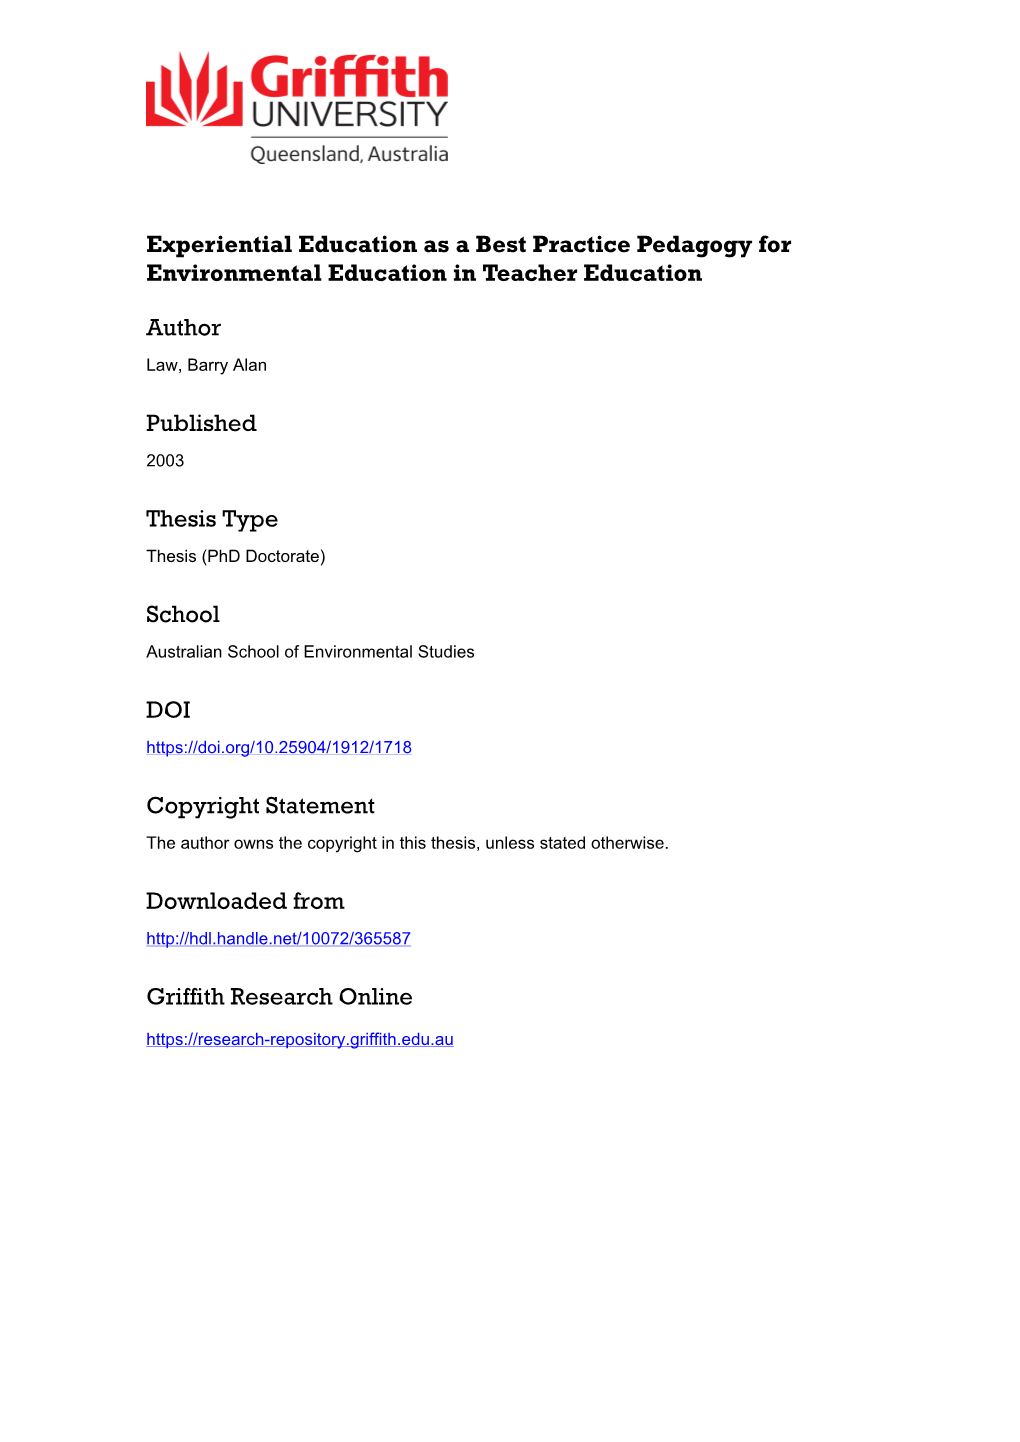 Experiential Education As a Best Practice Pedagogy for Environmental Education in Teacher Education